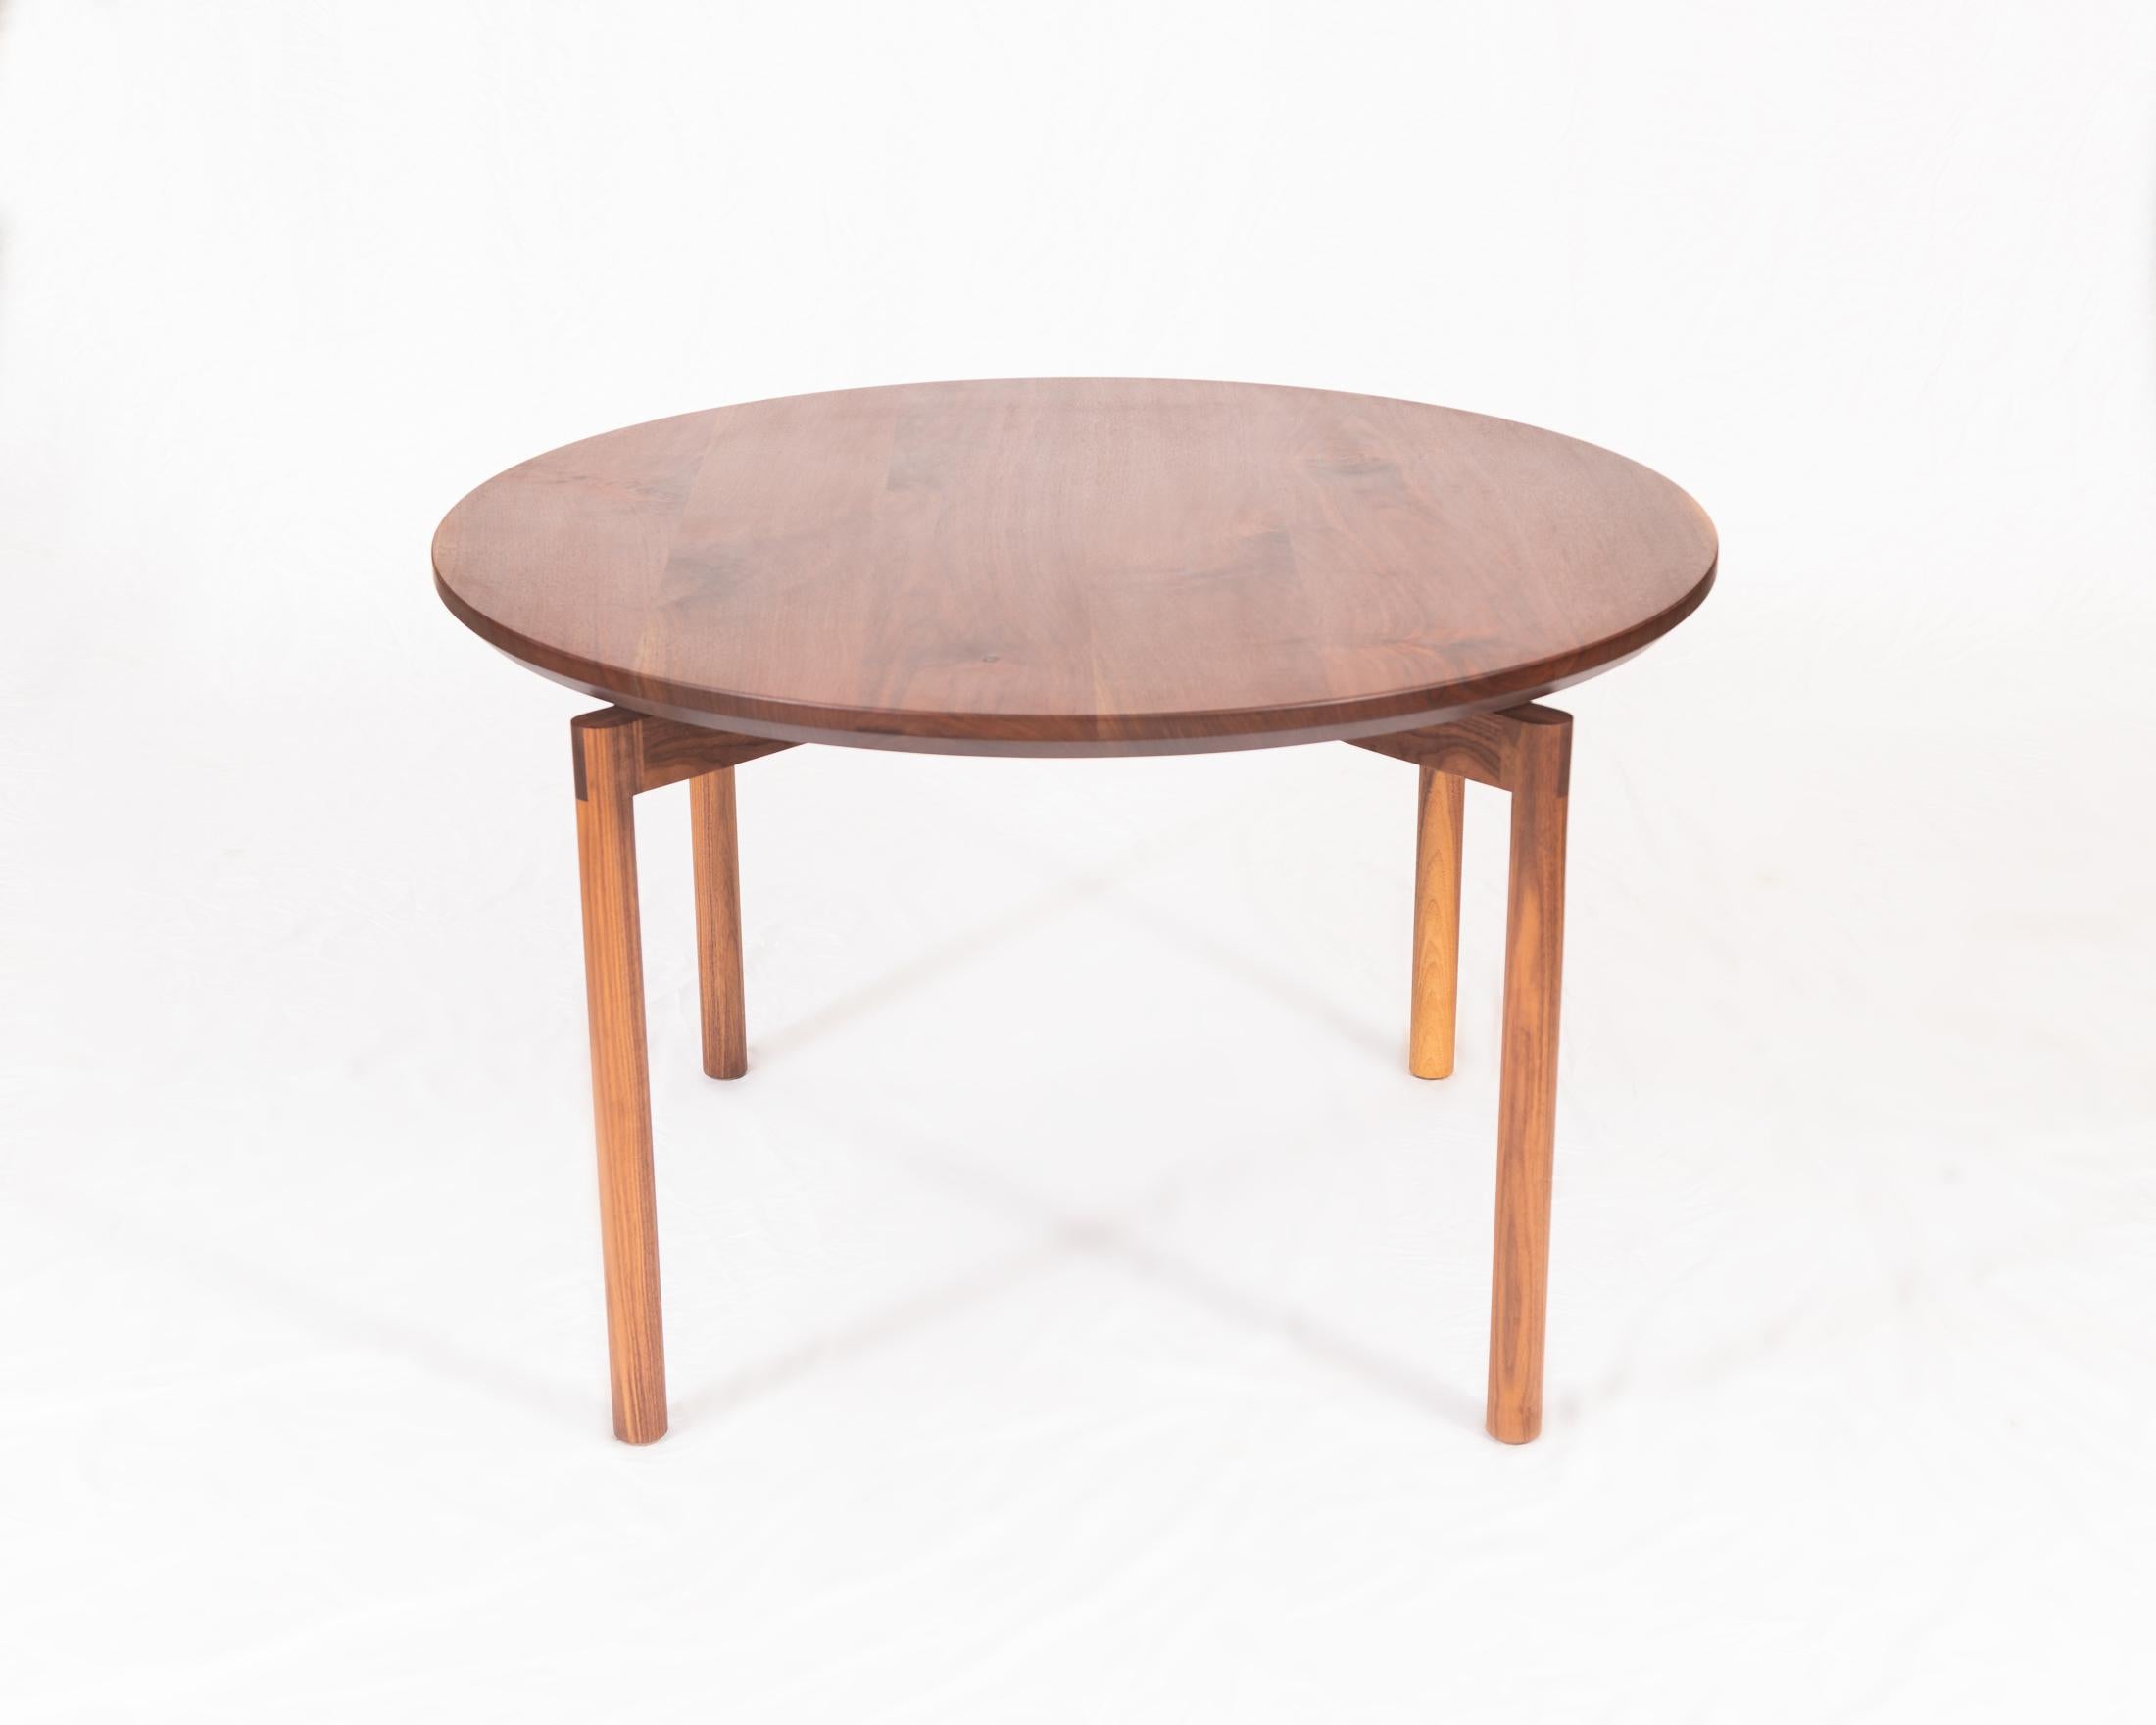 Hand-Crafted Enso Table, Walnut Dining Table with Knife-Edge and Exposed Joinery For Sale